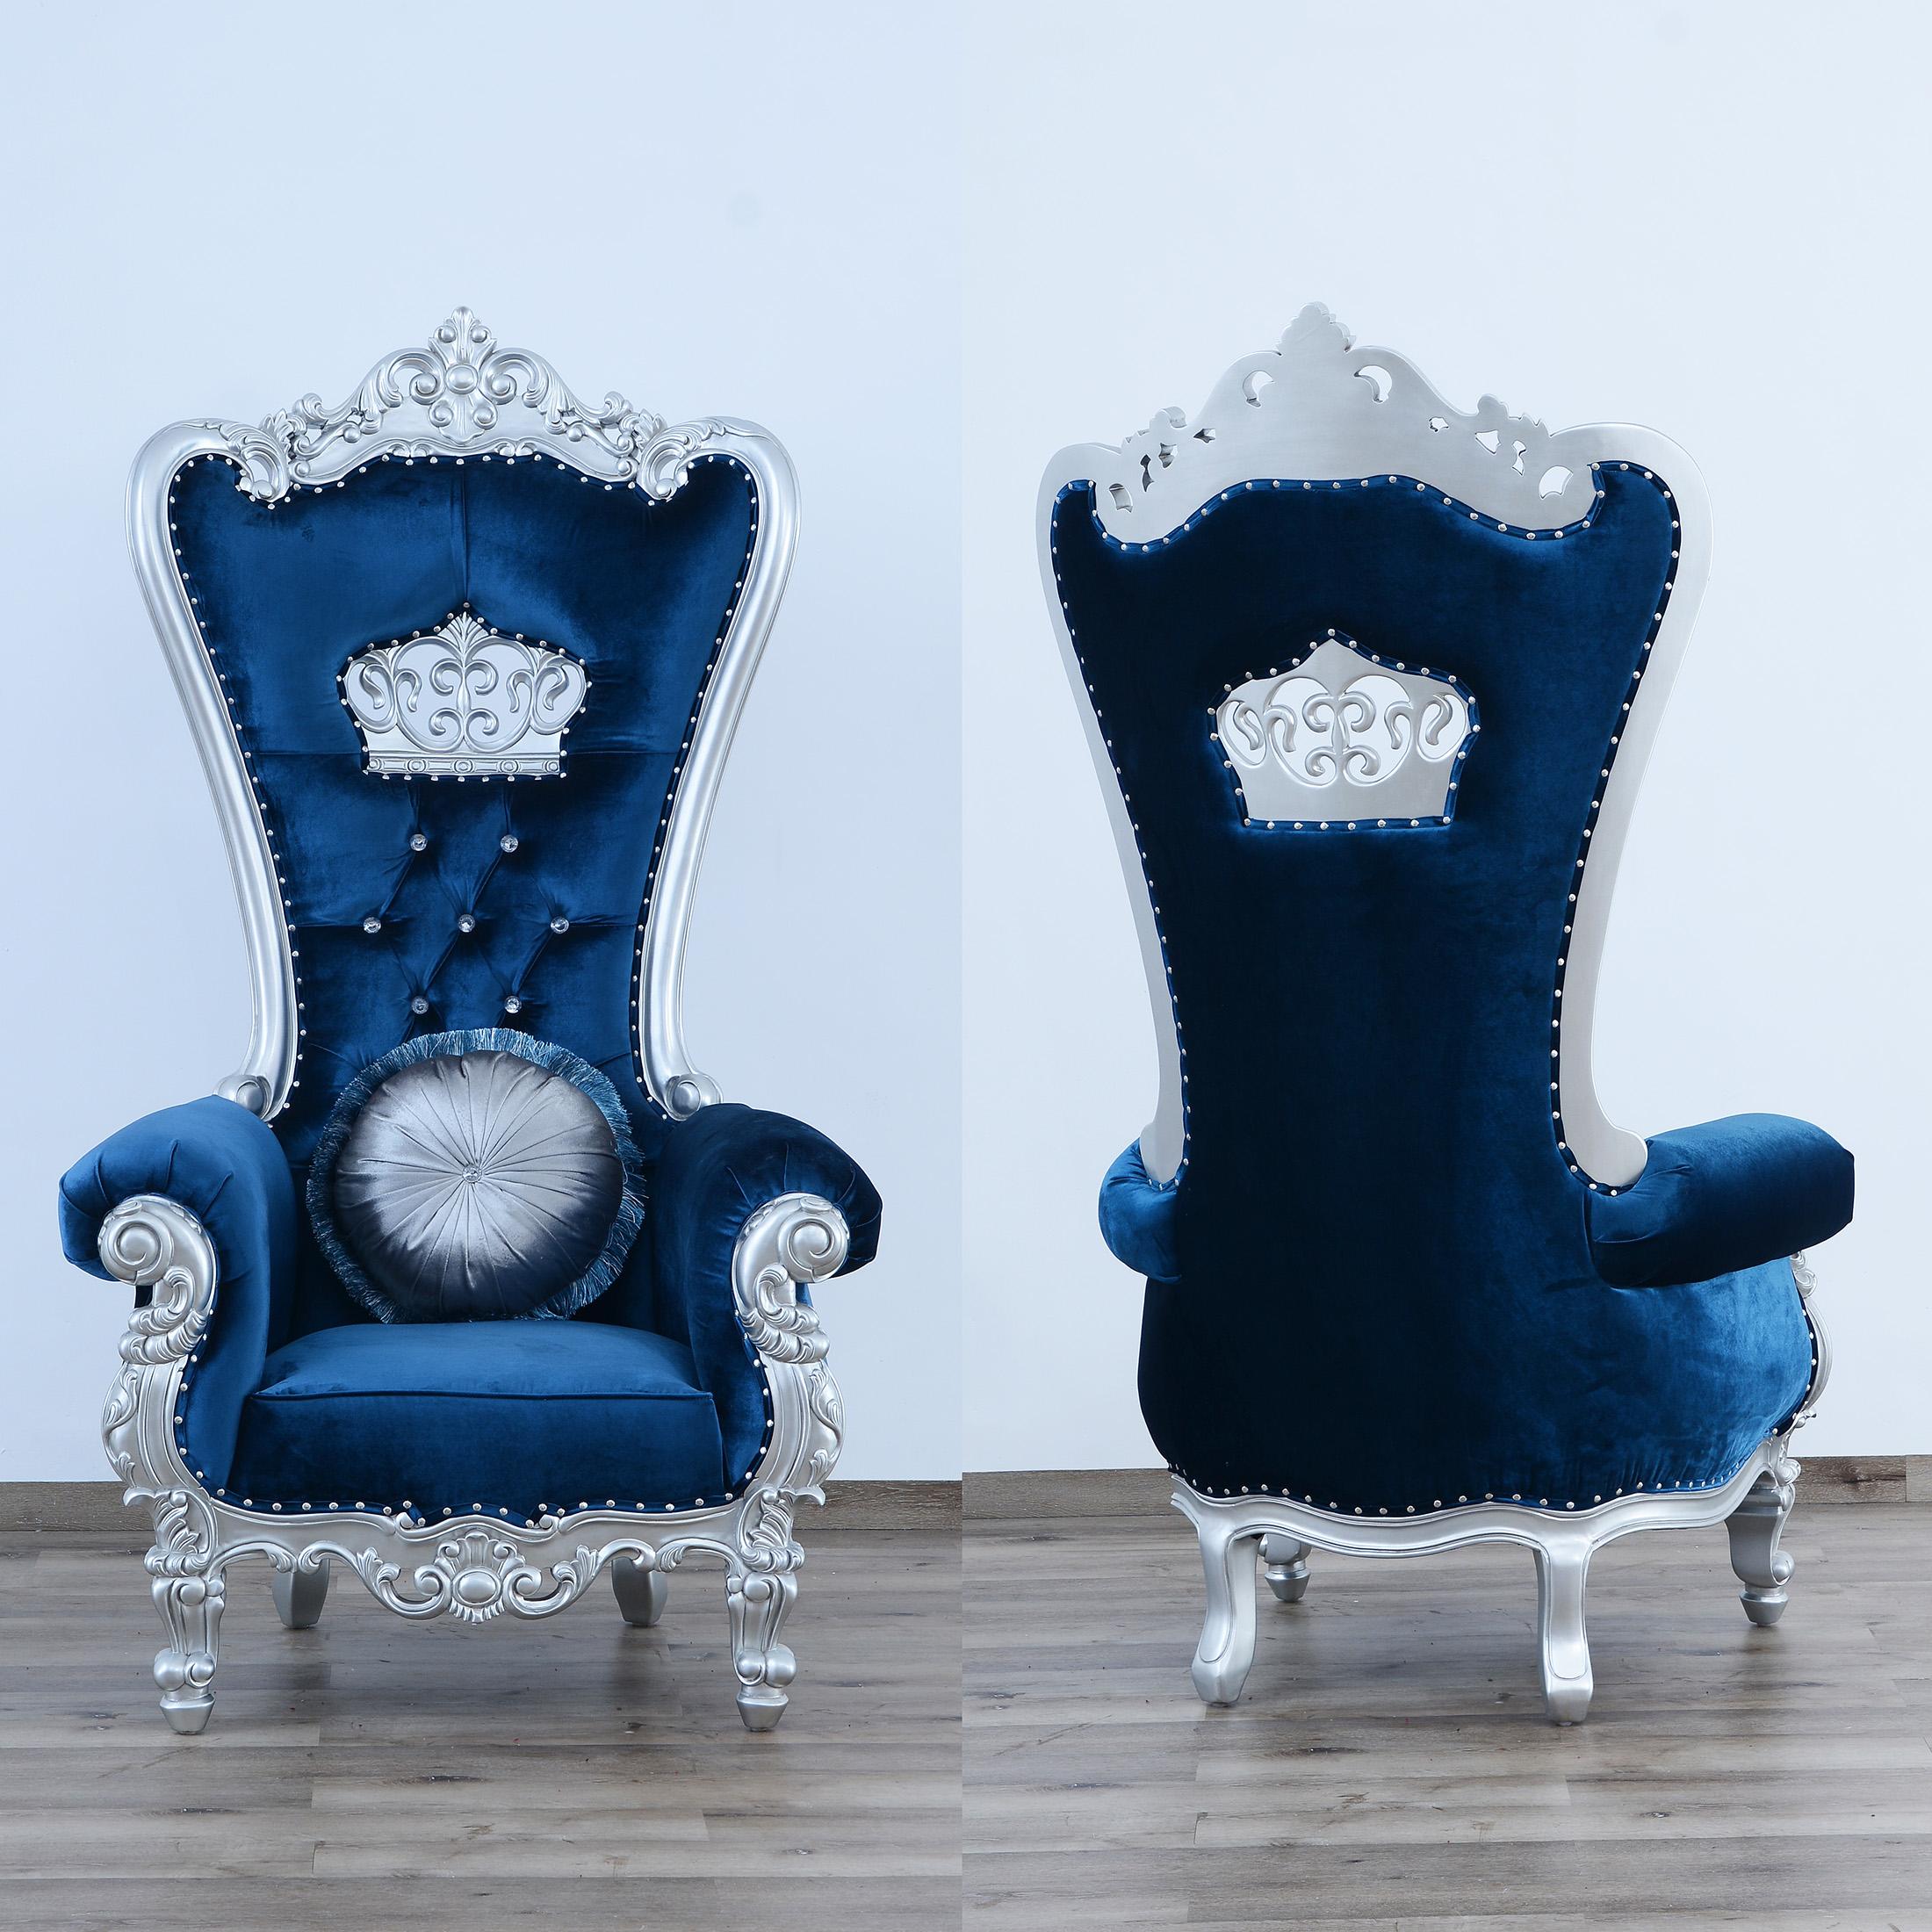 Classic, Traditional Arm Chair Set QUEEN ELIZABETH 35096-Set-2 in Silver, Blue Fabric